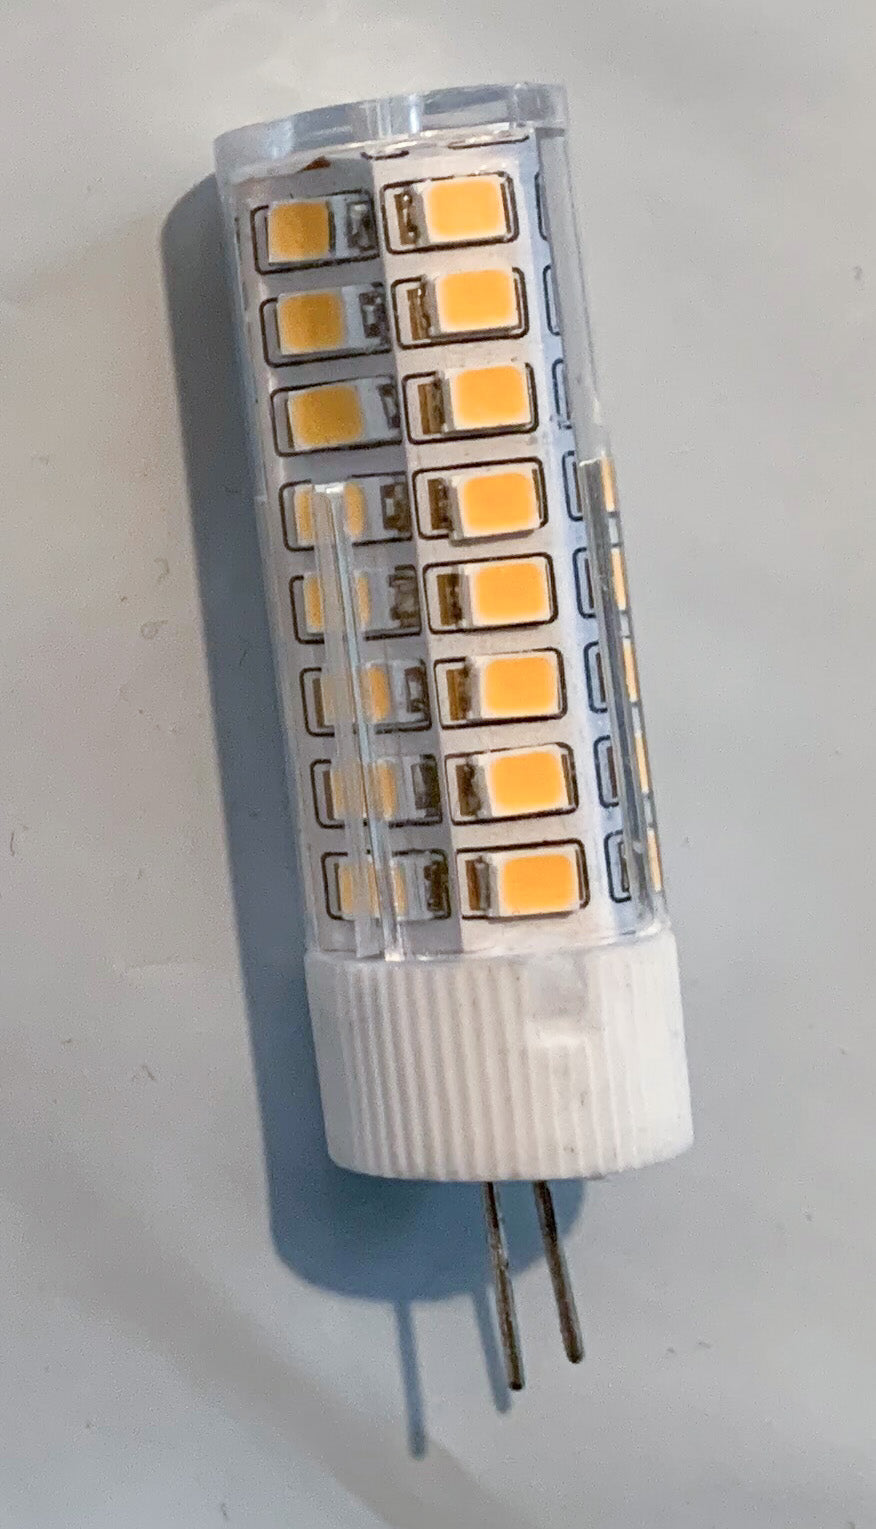 3W Bulb replacement